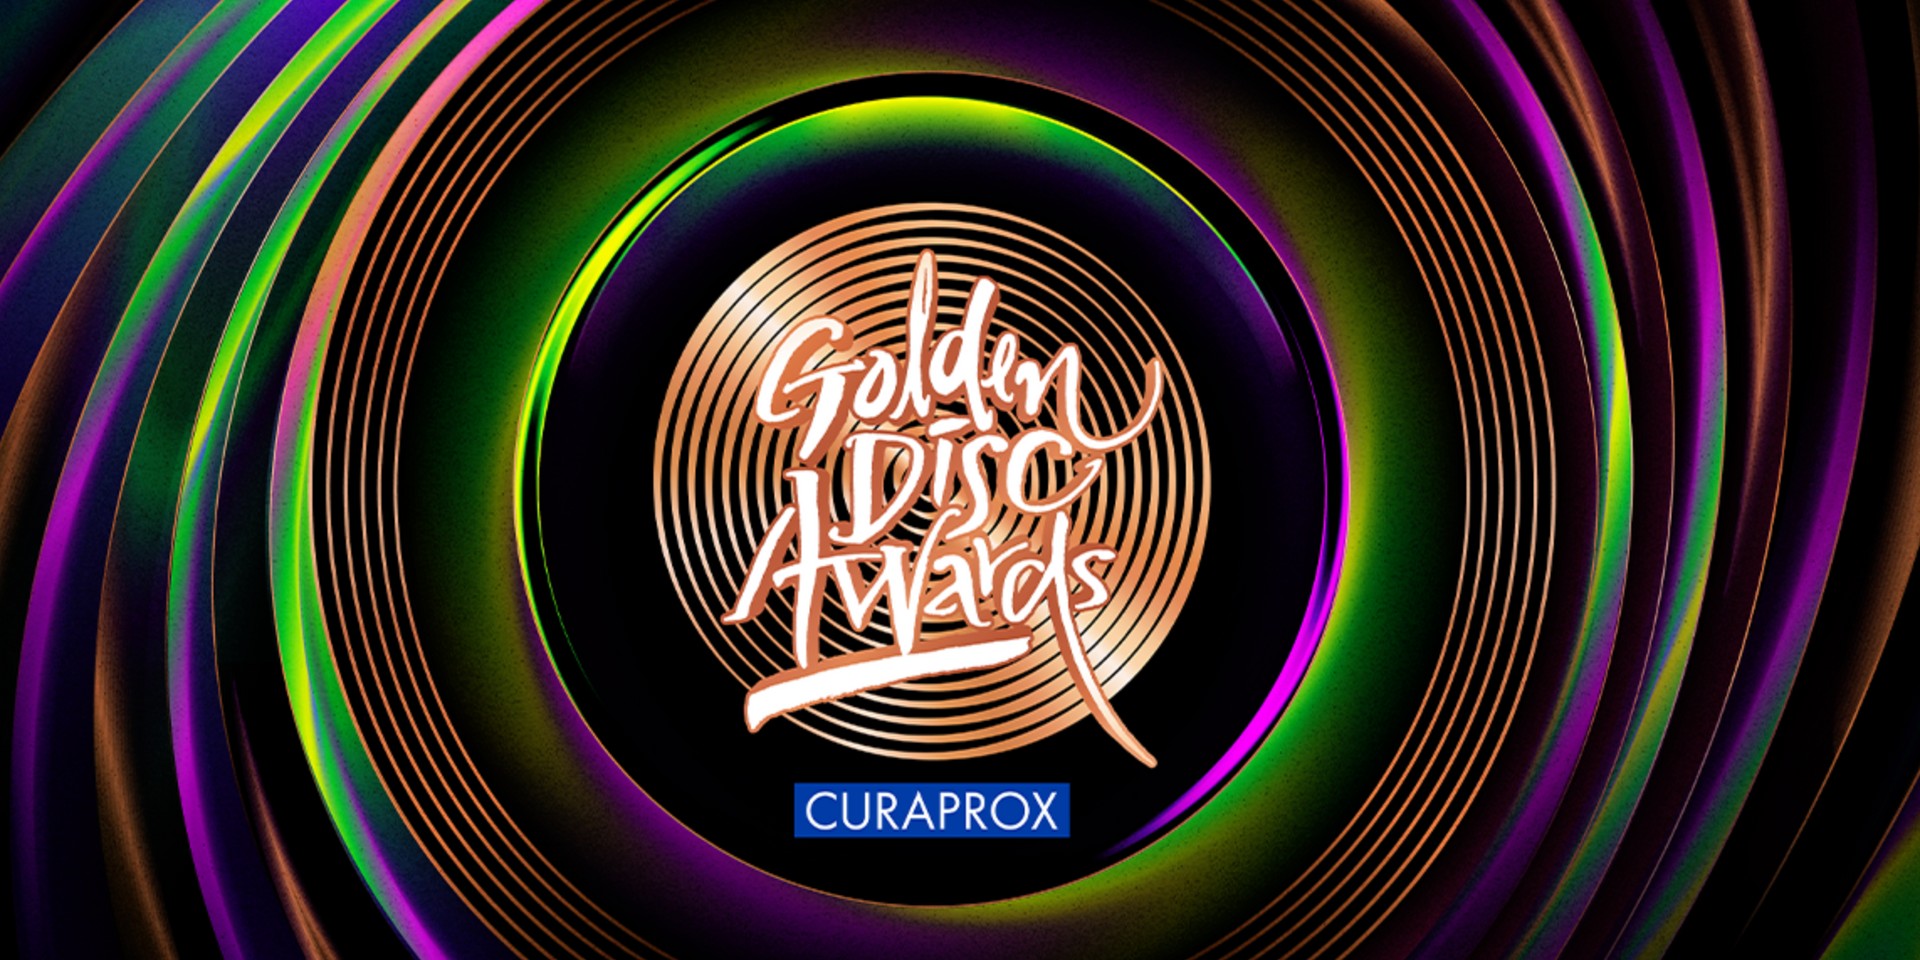 Golden Disc Awards announce nominees - BLACKPINK, BTS, EXO, ITZY, NCT, Stray Kids, Taemin, and more